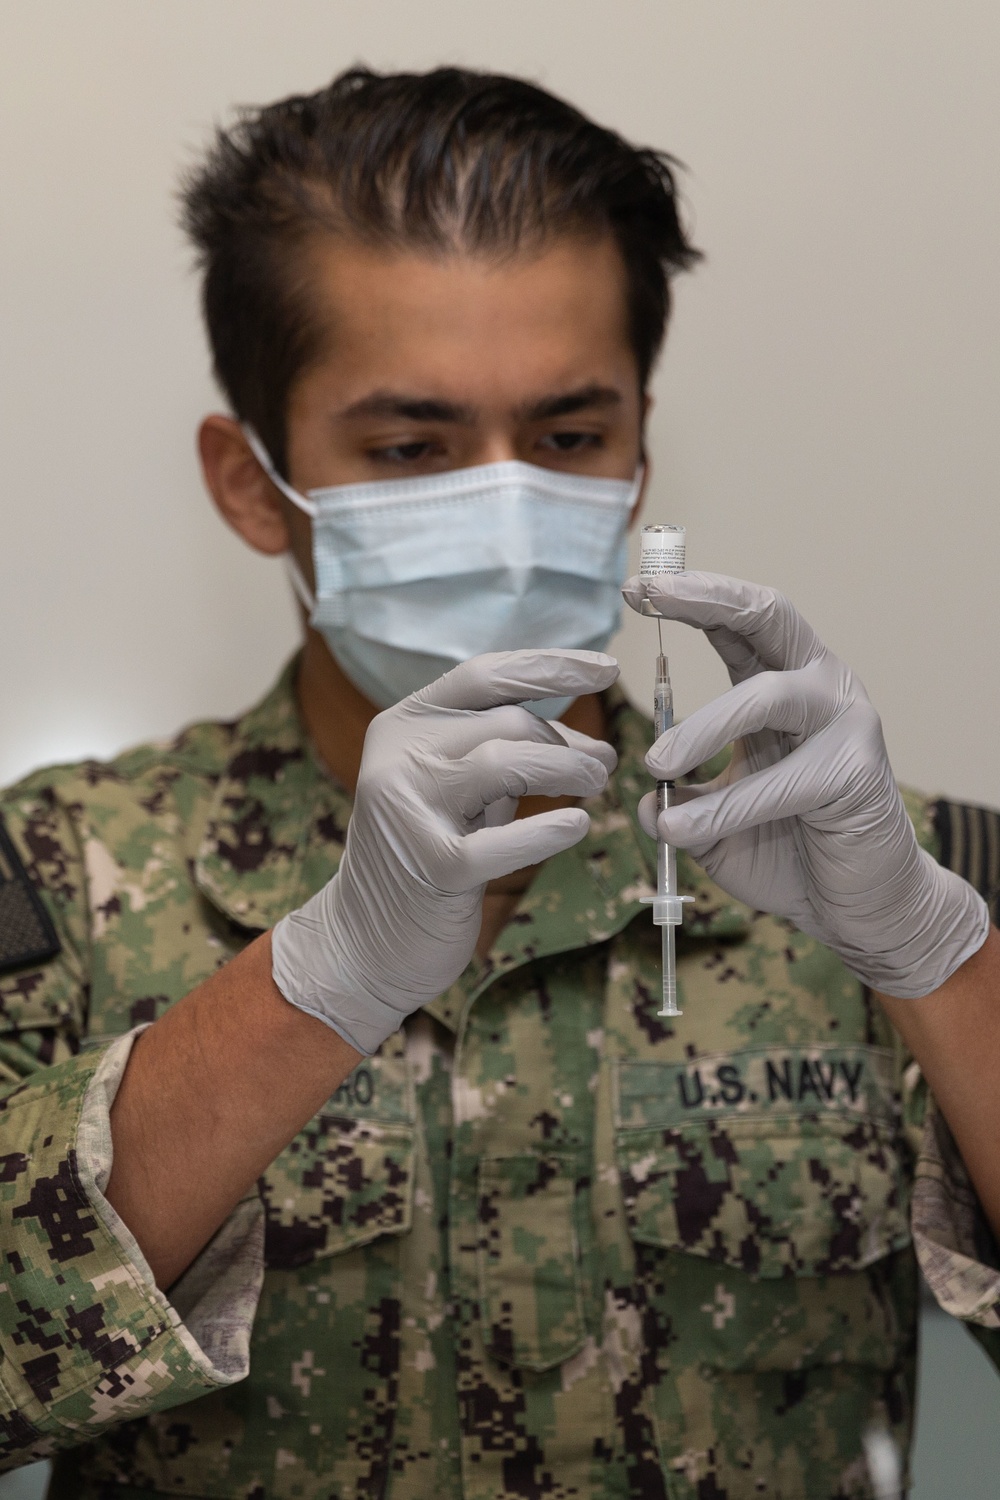 First Pendleton service members receive COVID vaccine